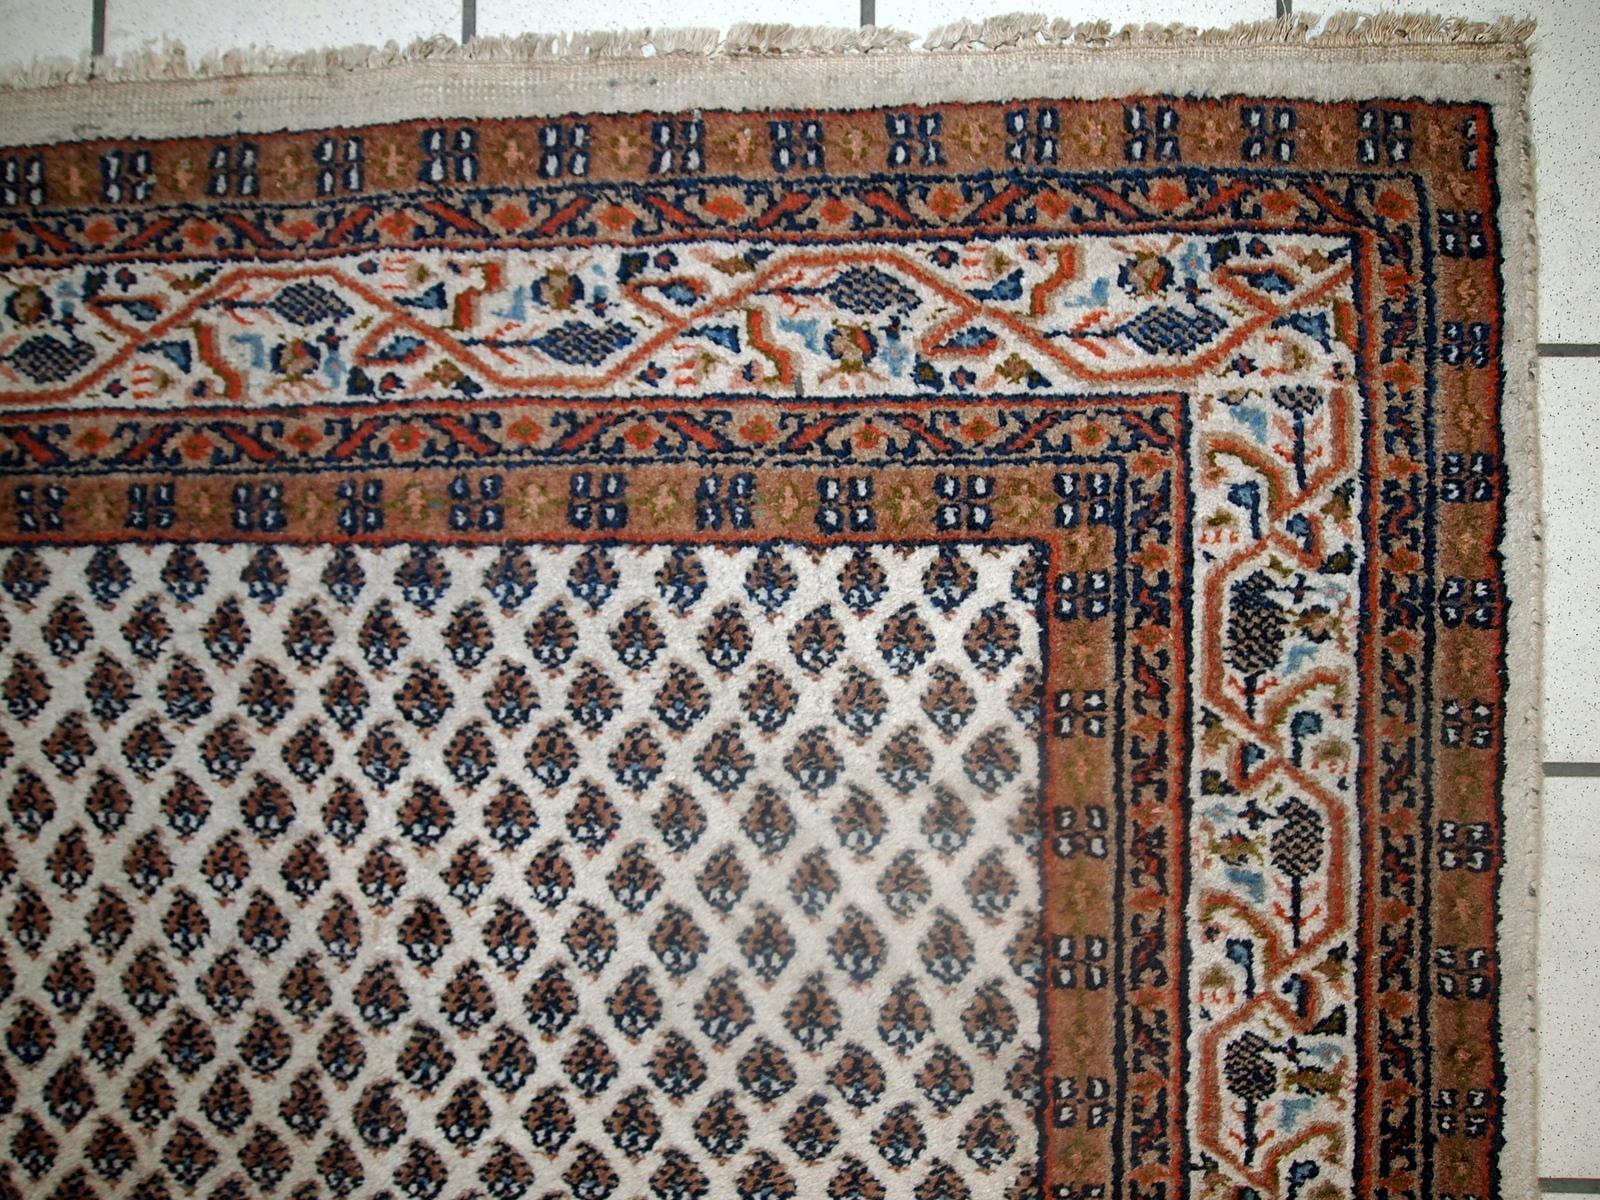 Handmade vintage Seraband carpet from India, made in the end of 20th century. The rug is in original good condition.

-condition: original good,

-circa: 1980s,

-size: 4' x 6' (124cm x 185cm),

-material: wool,

-country of origin: